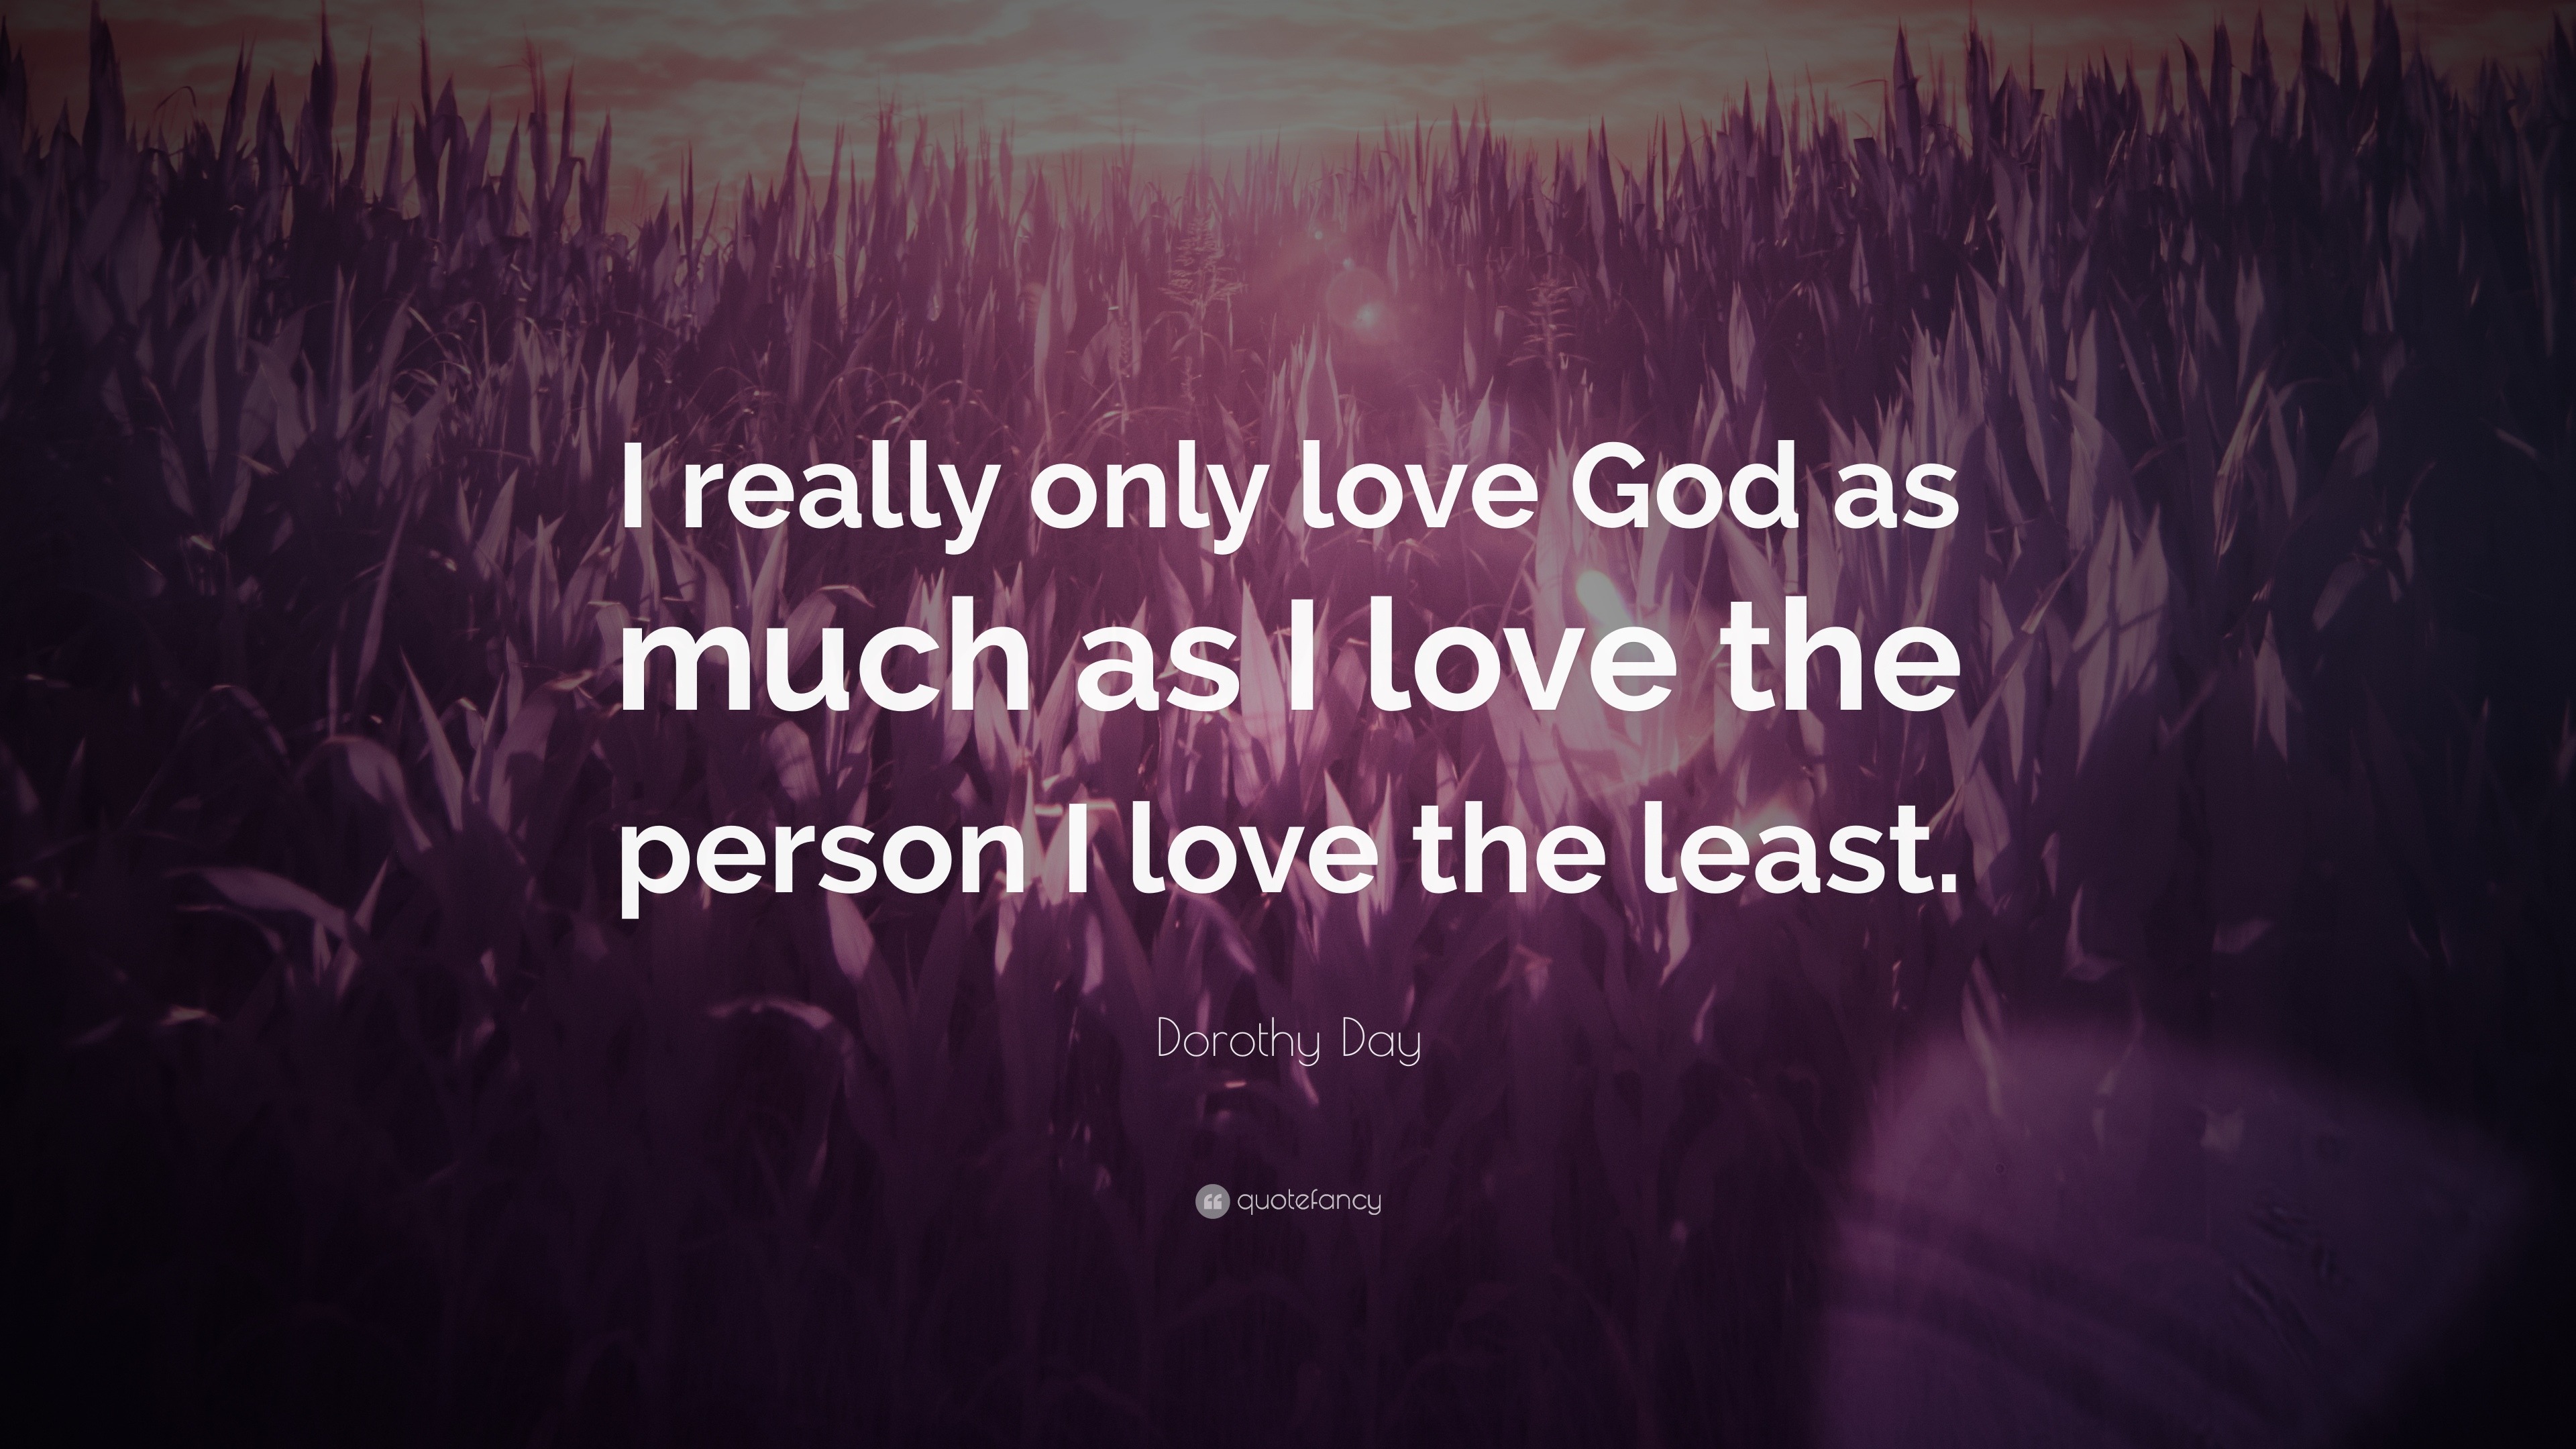 Download Dorothy Day Quote: "I really only love God as much as I ...